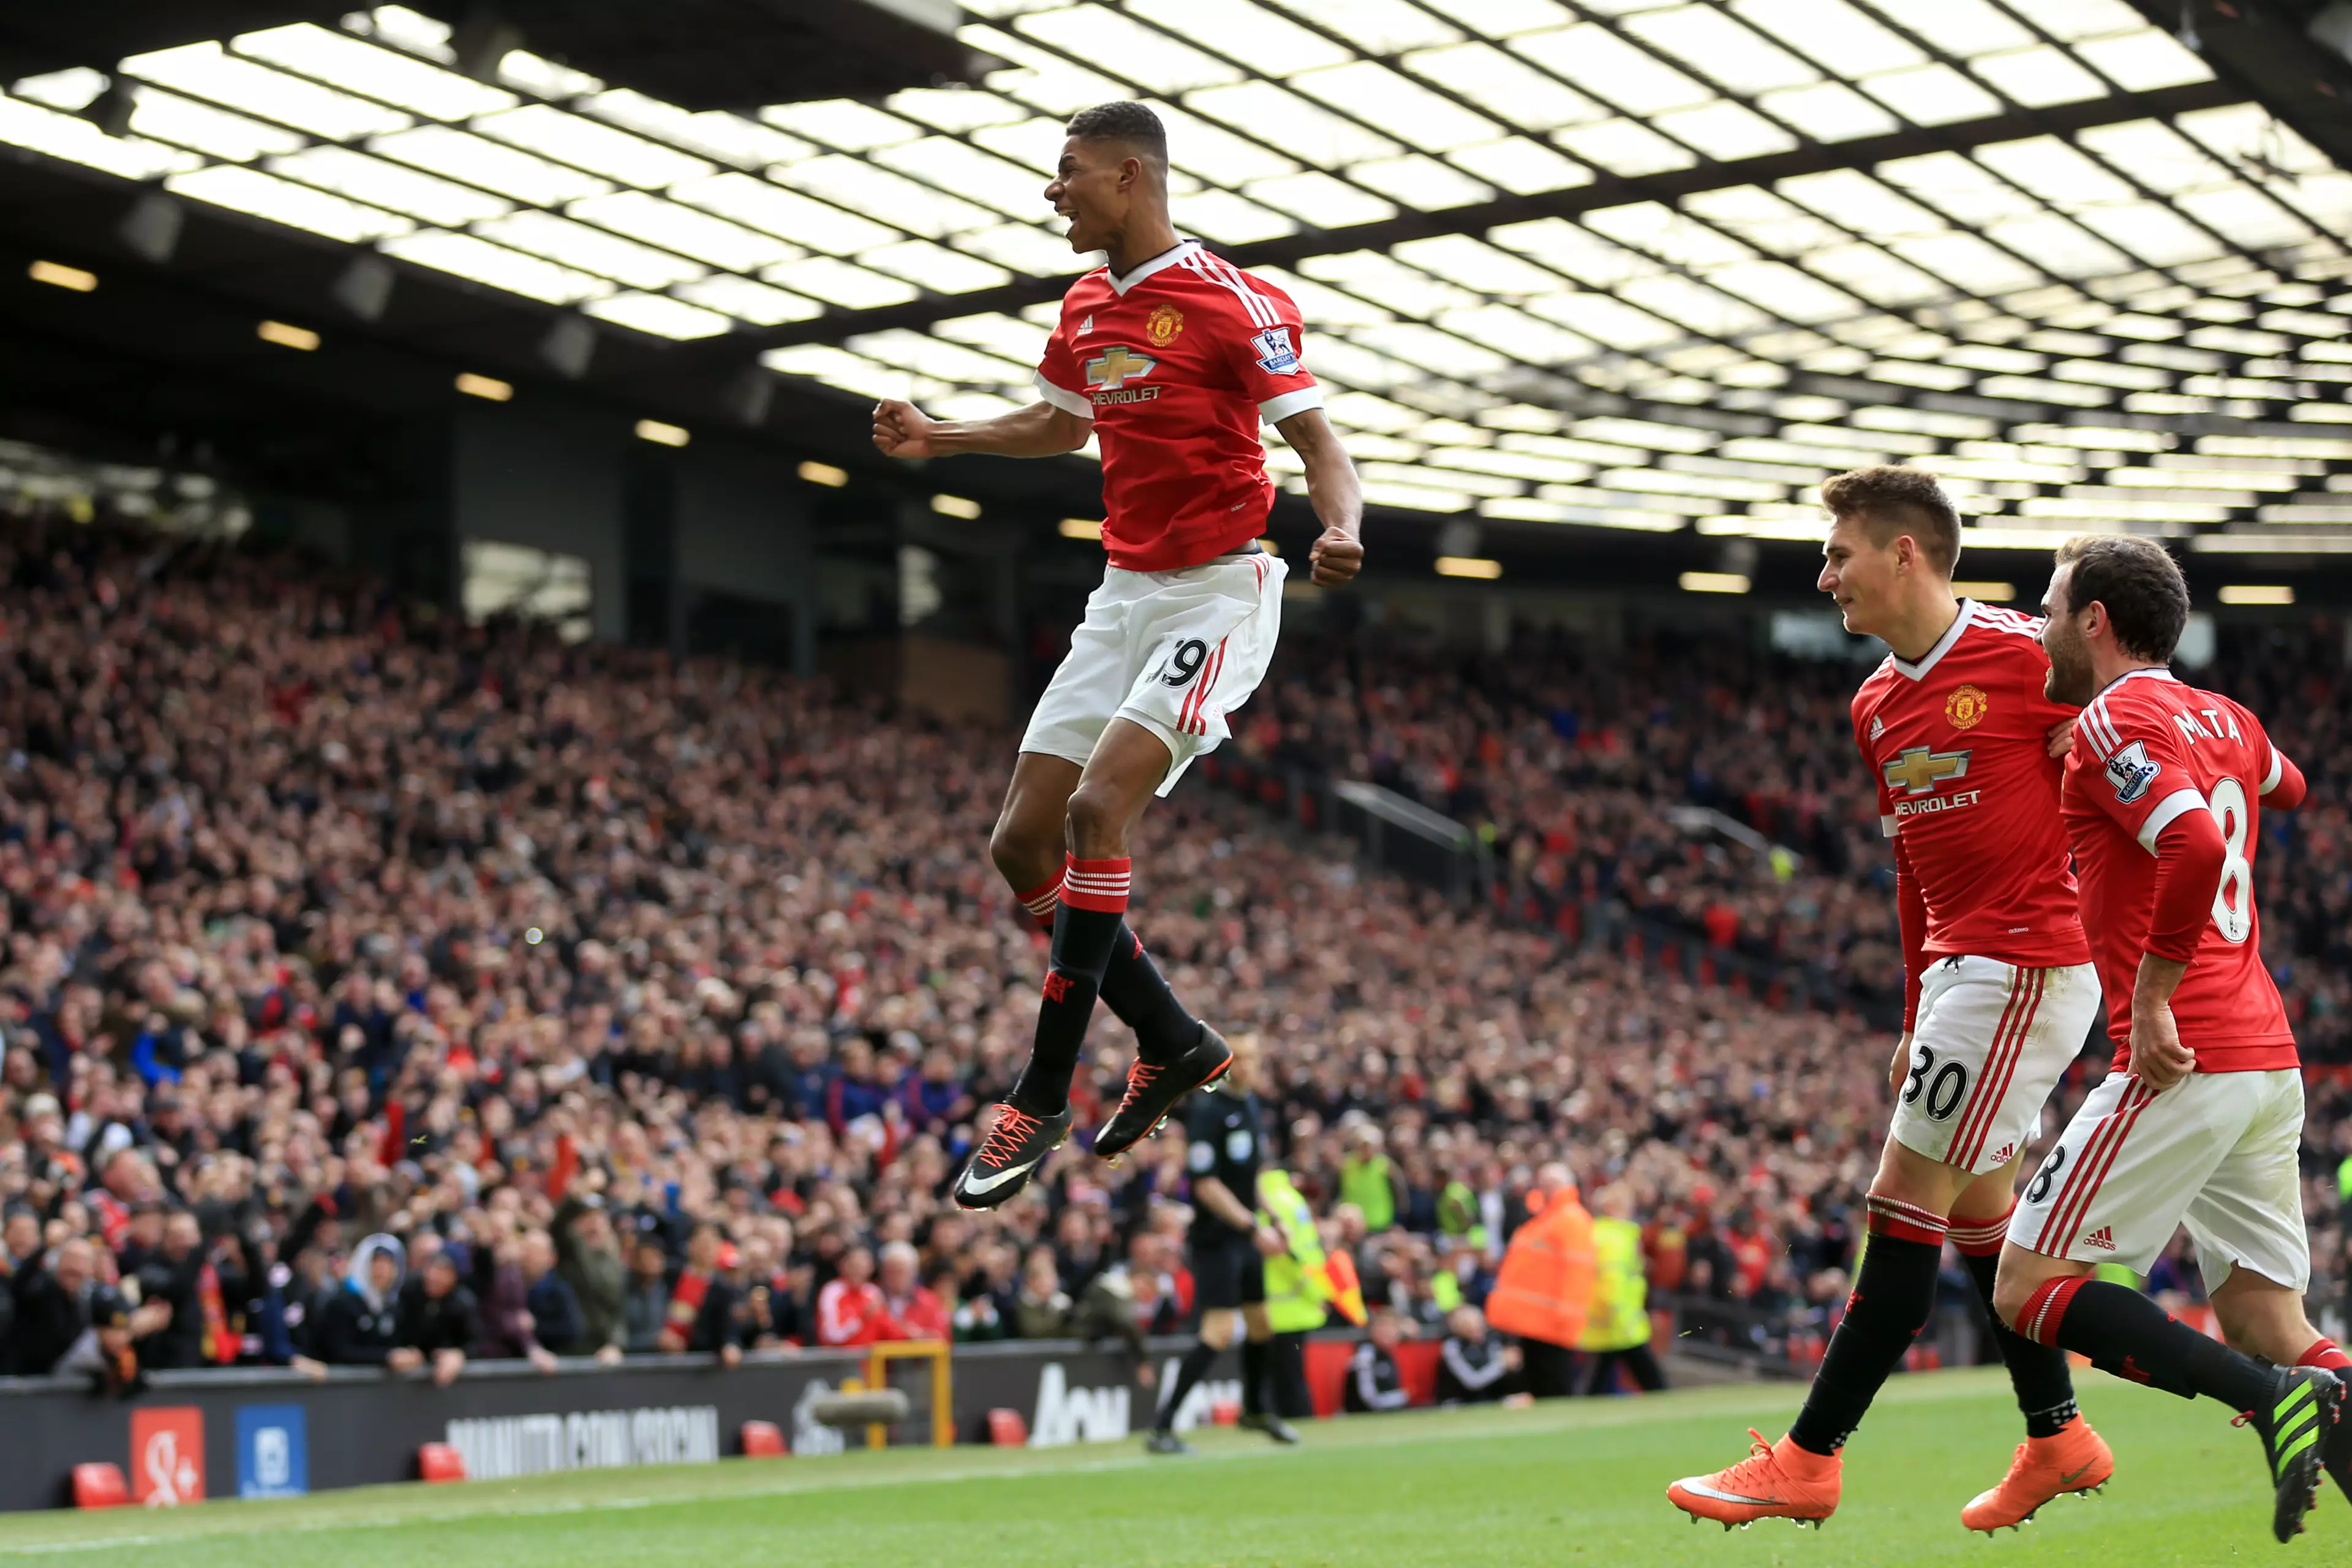 A Lot Of Fantasy Football Managers Have Jumped On The Rashford Bandwagon